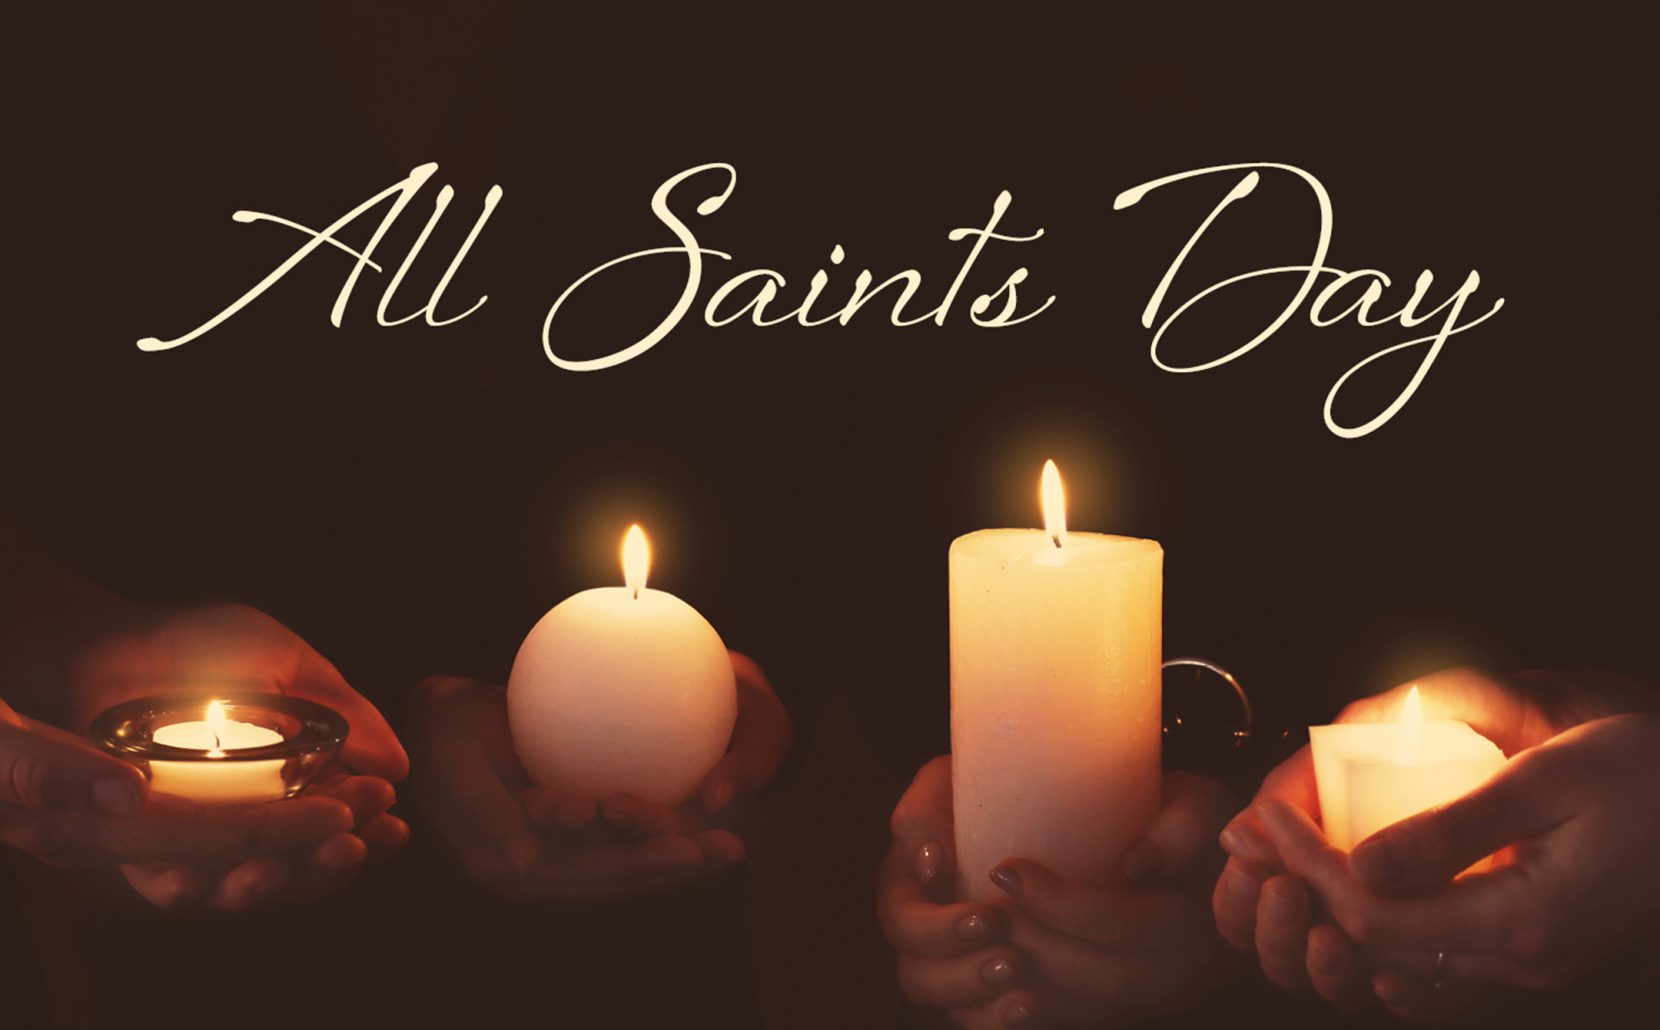 All Saints Day | Church of the Incarnation